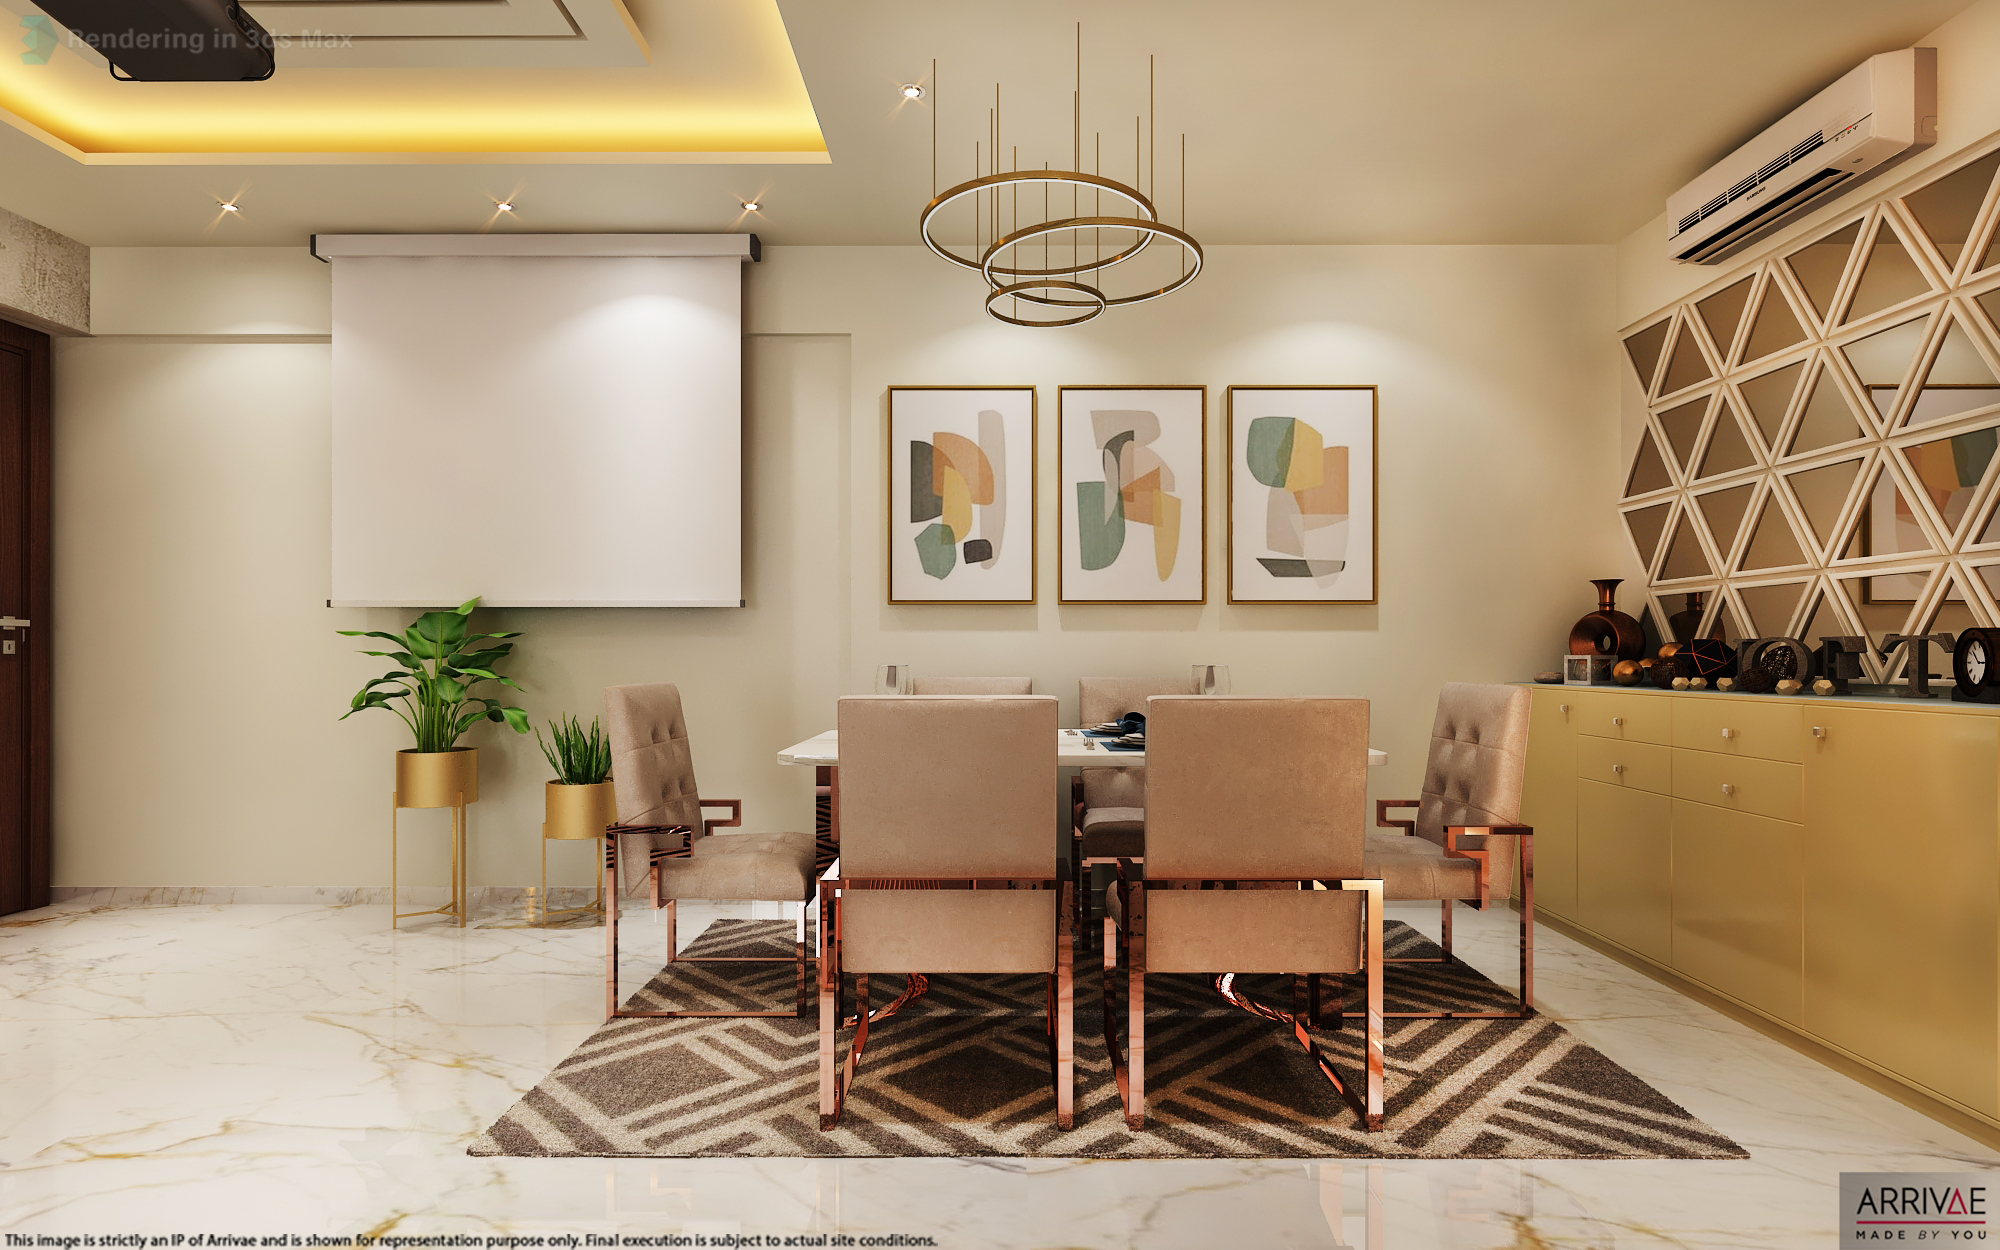 Mr. Gandhi's luxurious house - Eclectic - Kitchen - Mumbai - by Arrivae |  Houzz